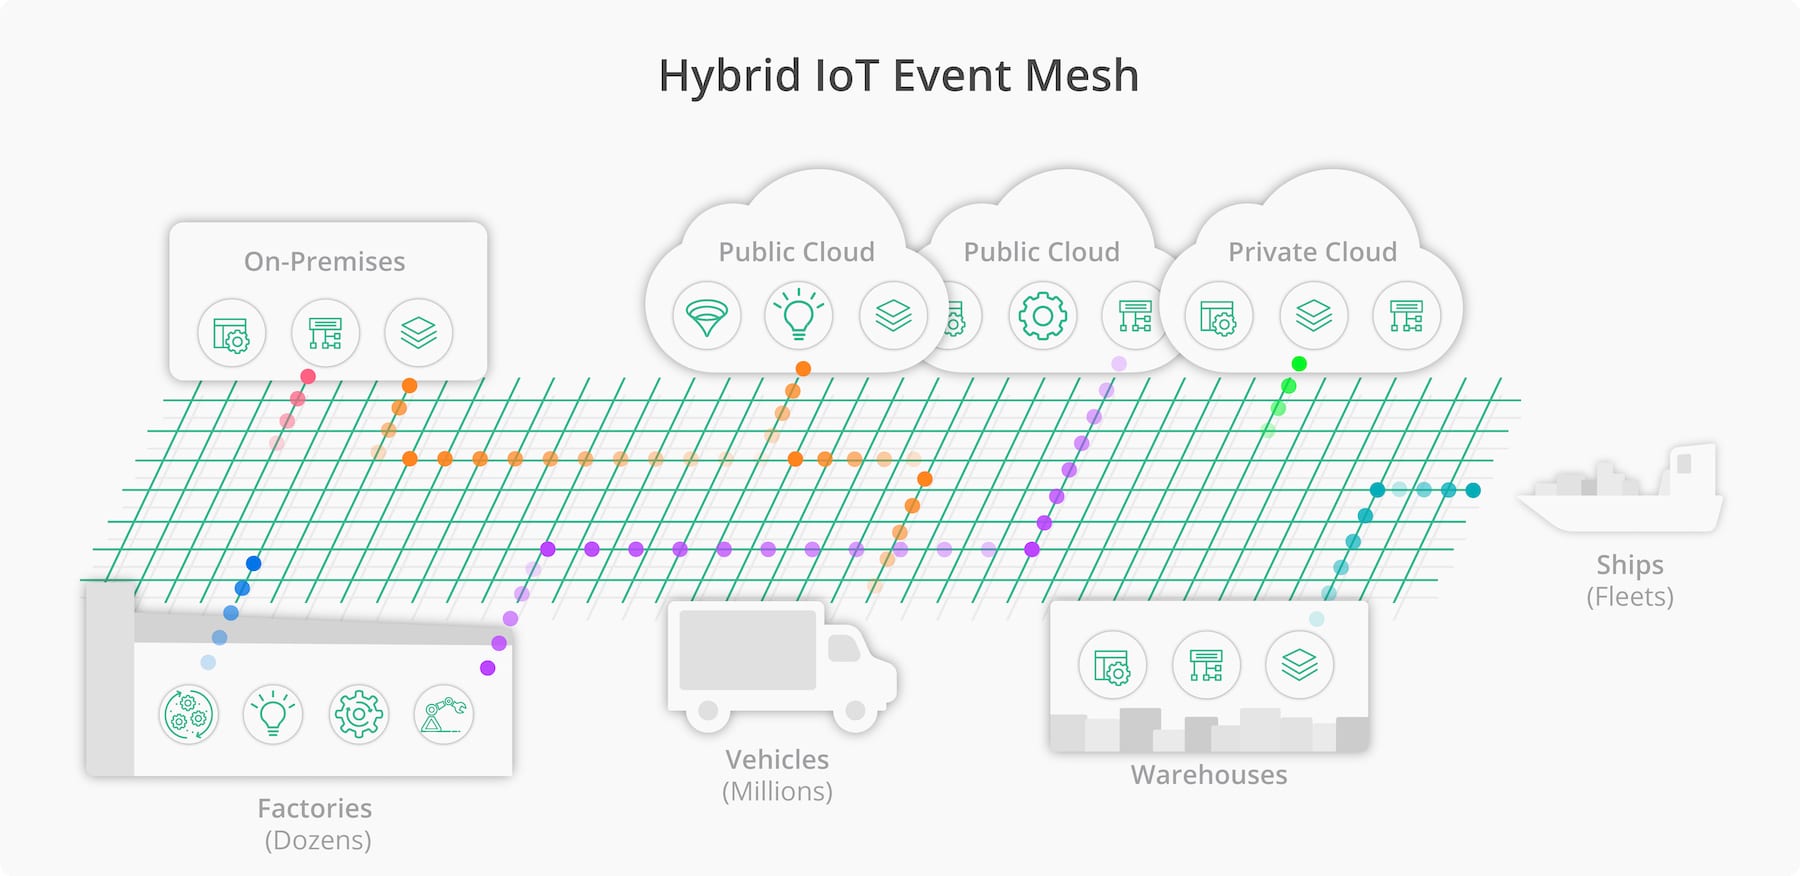 A diagram showing the hybrid IoT event mesh